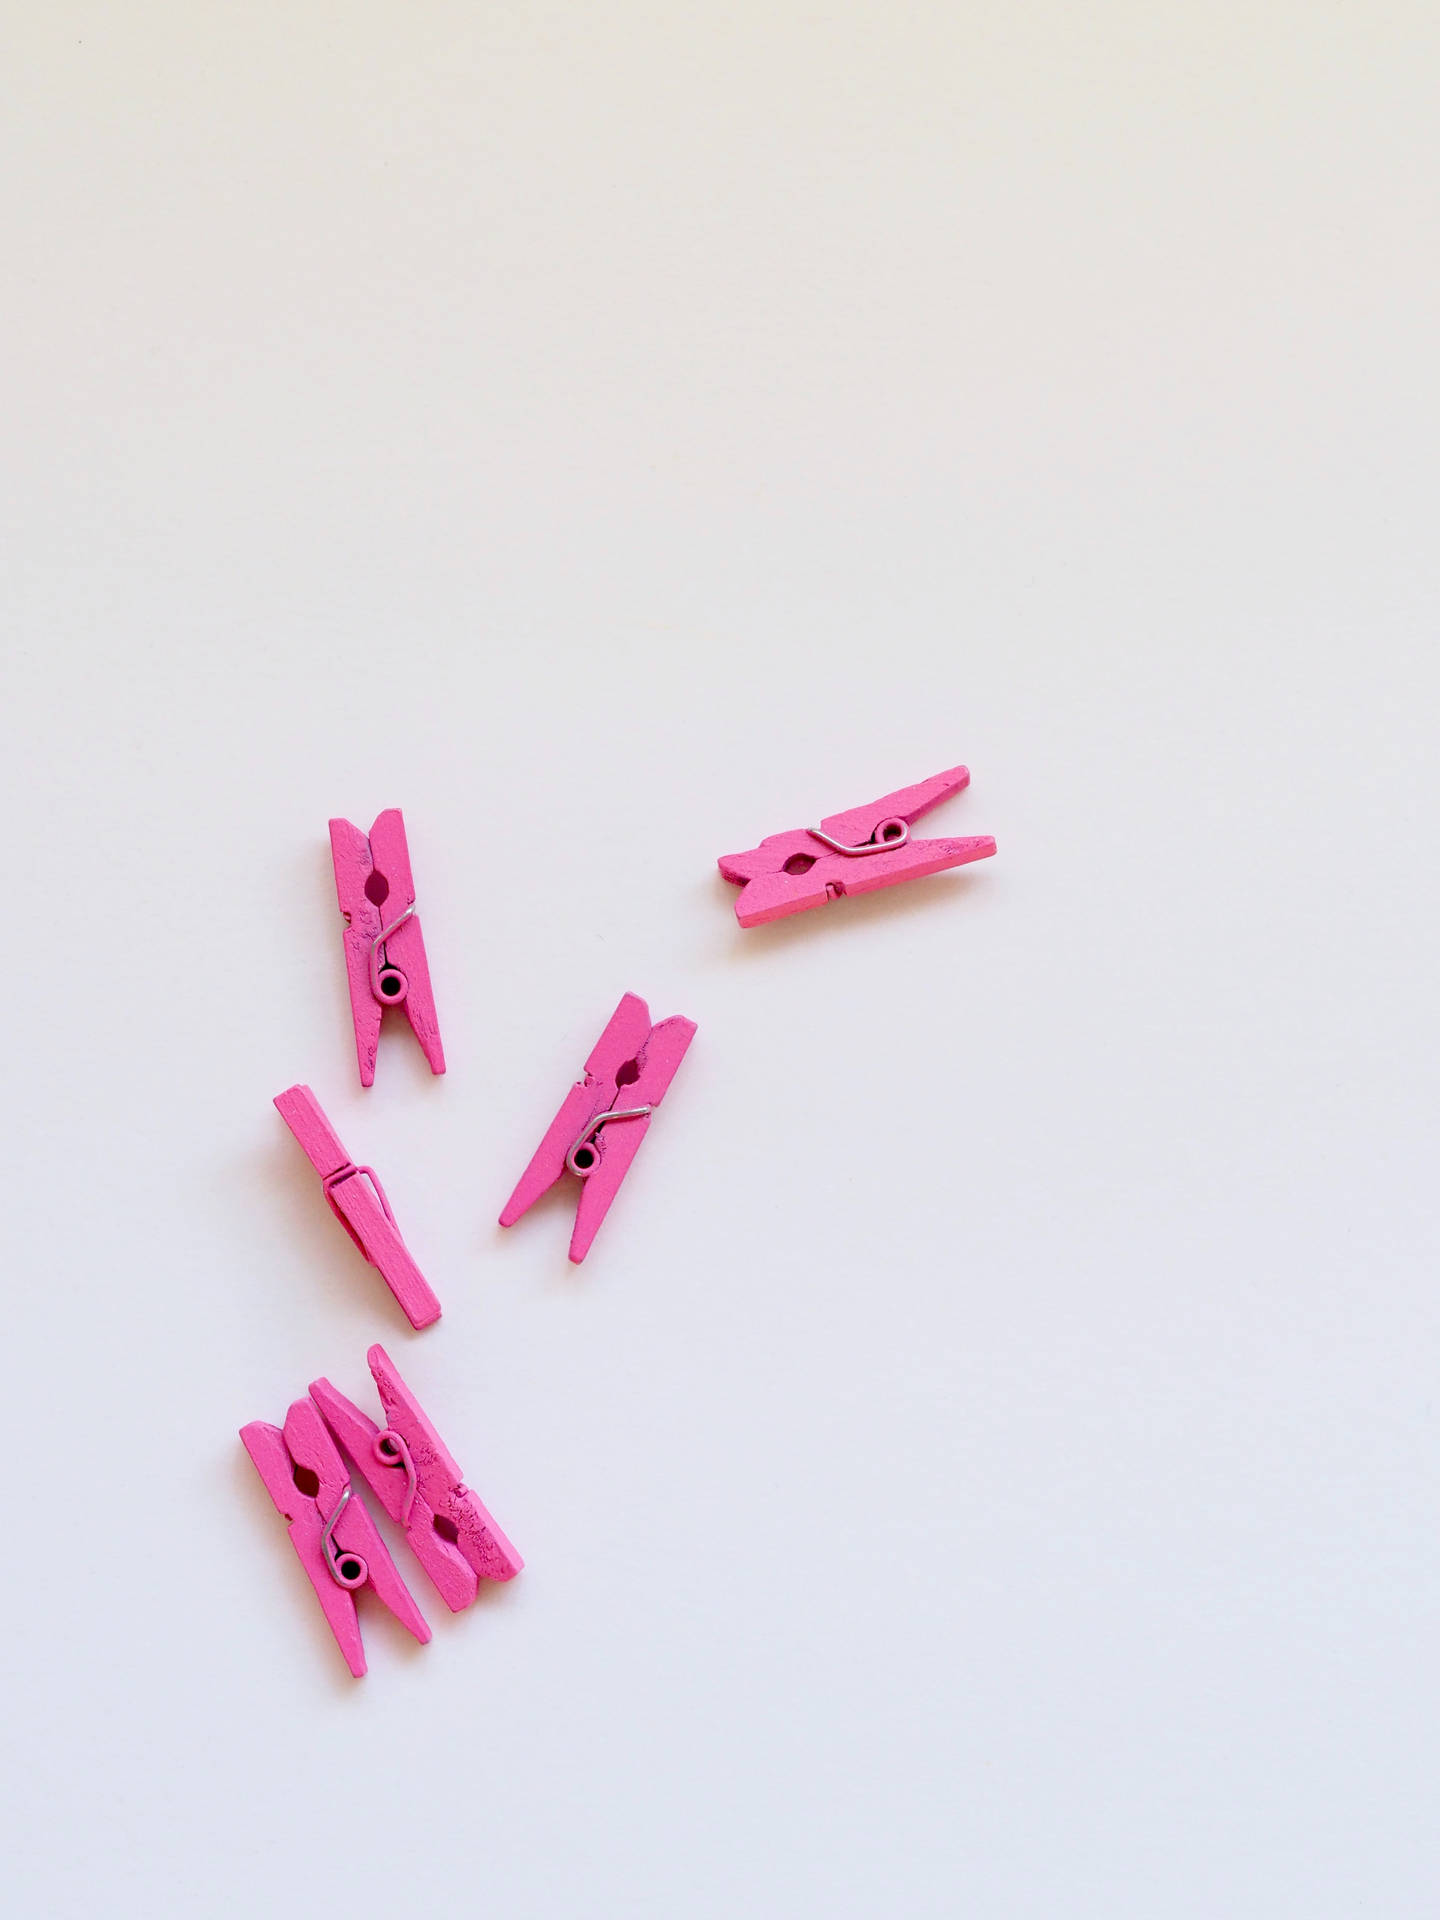 Pink Clippers On White Background Wallpaper